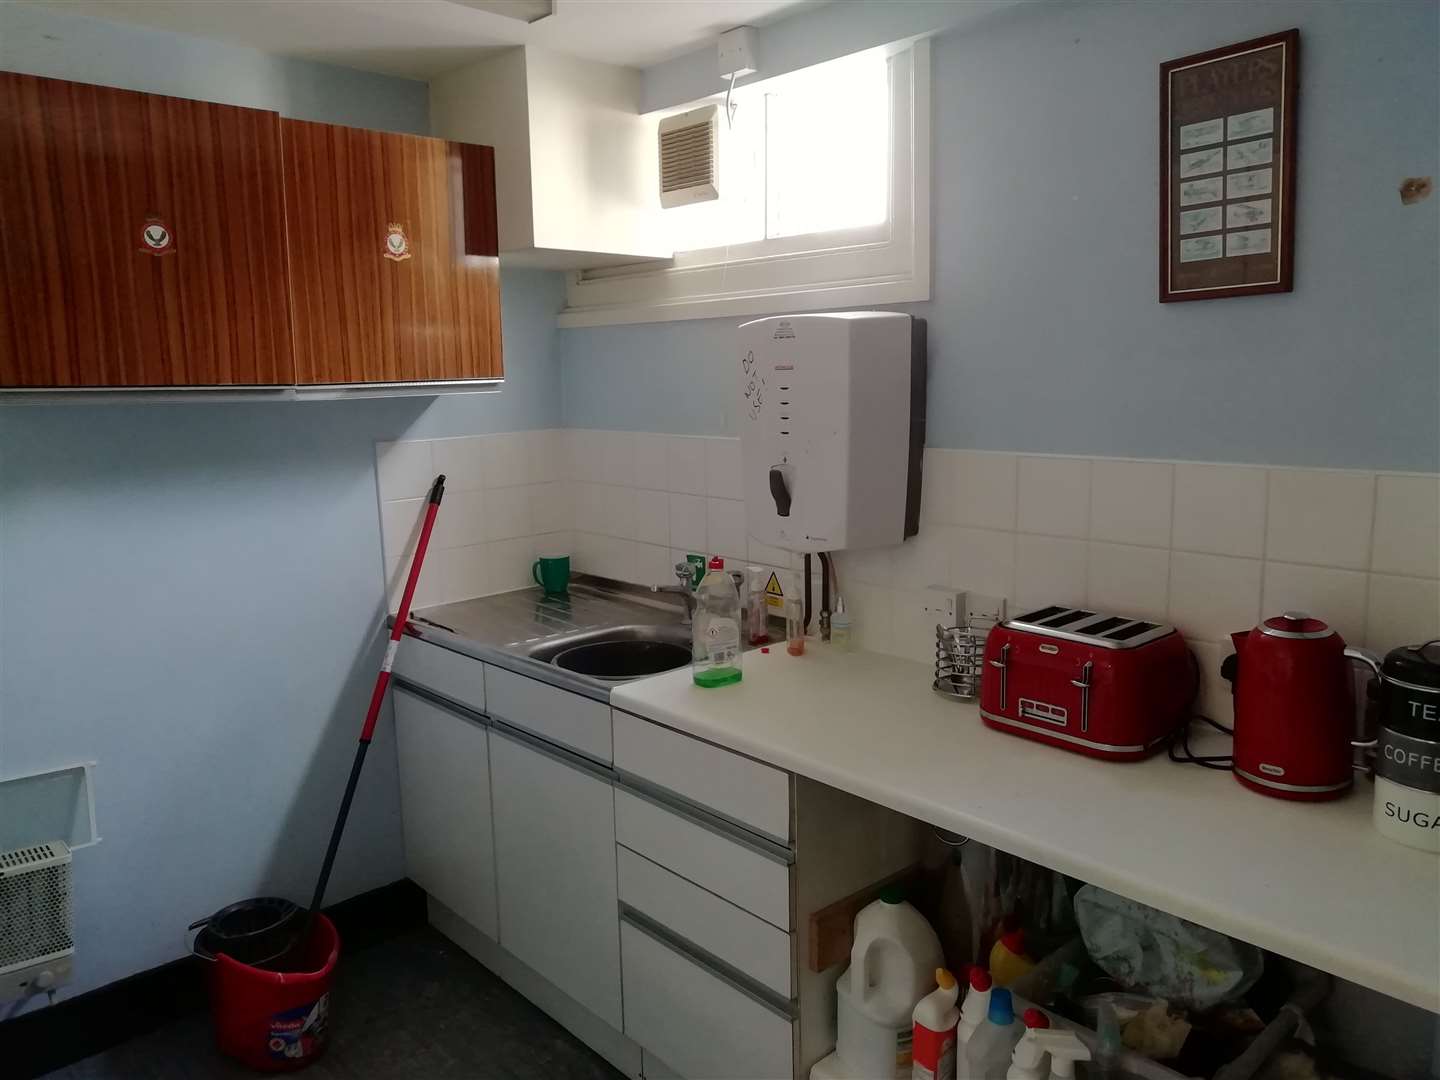 Help is needed to get this old kitchen replaced